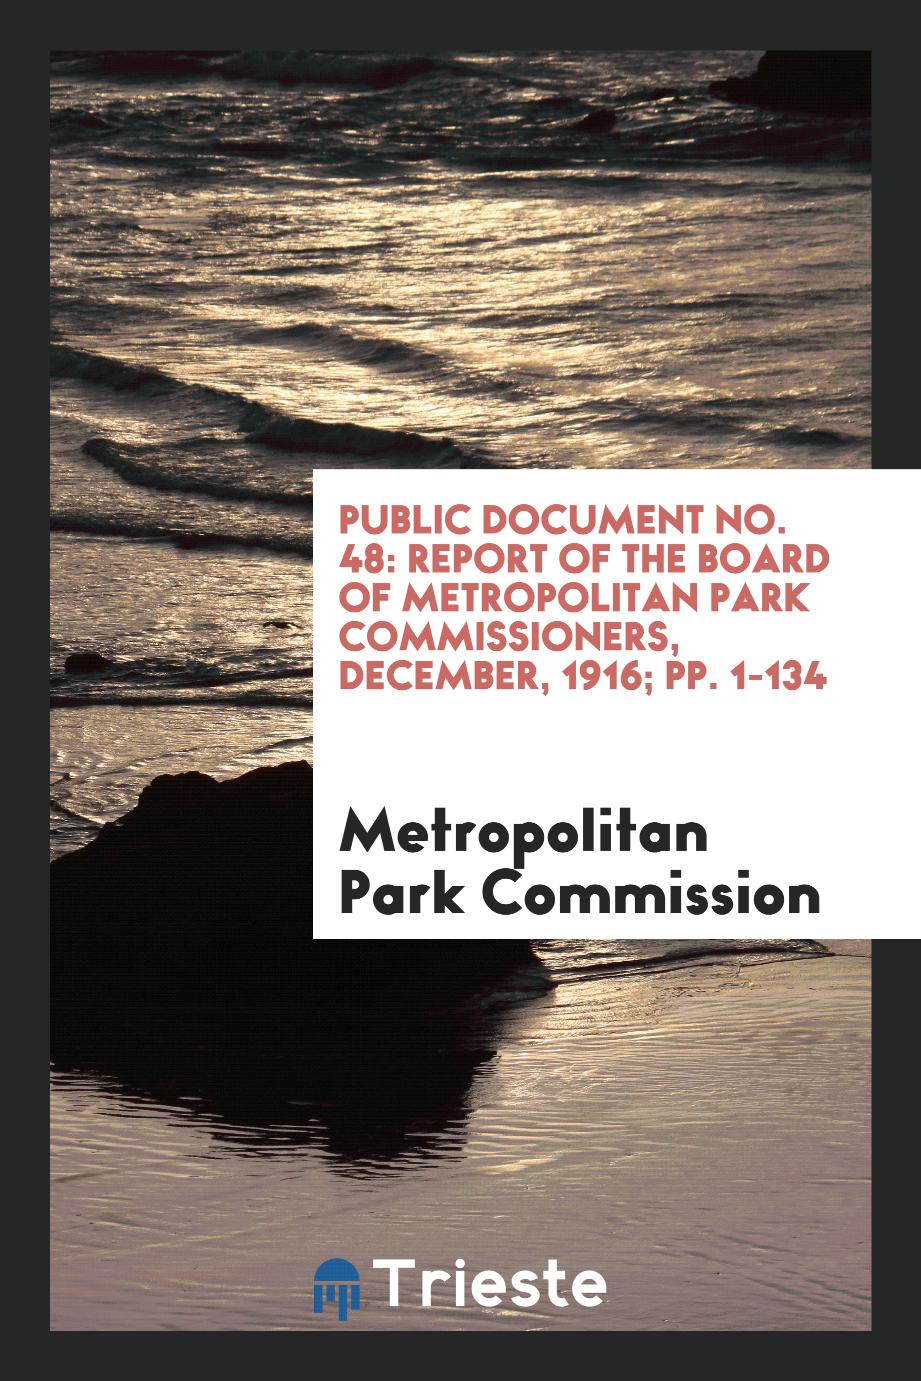 Public Document No. 48: Report of the Board of Metropolitan Park Commissioners, December, 1916; pp. 1-134